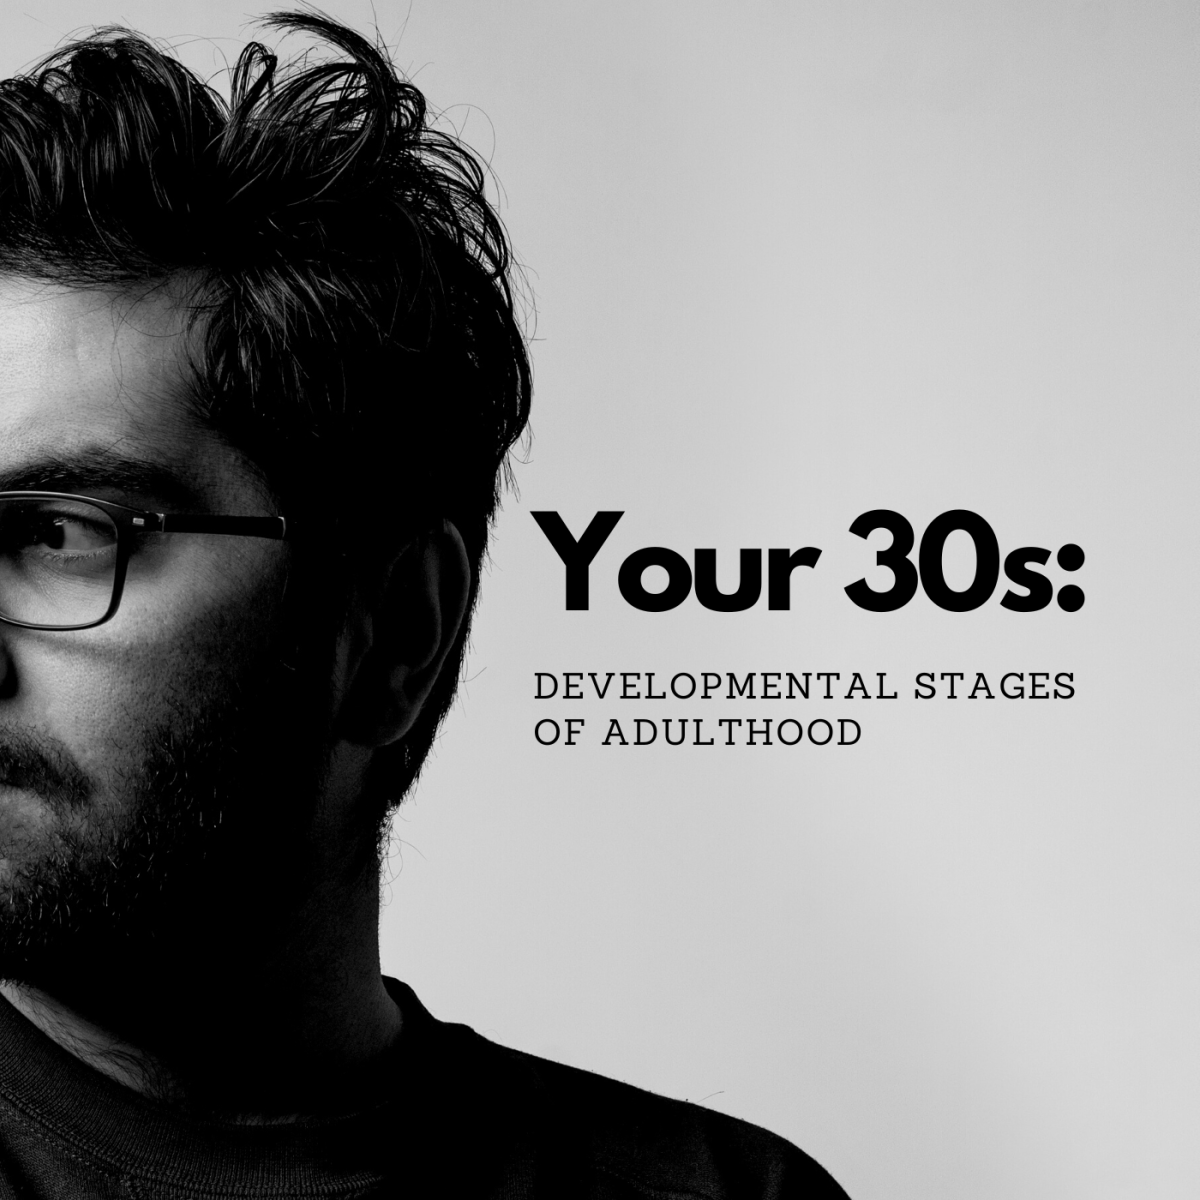 Stages of adulthood: Your 30s